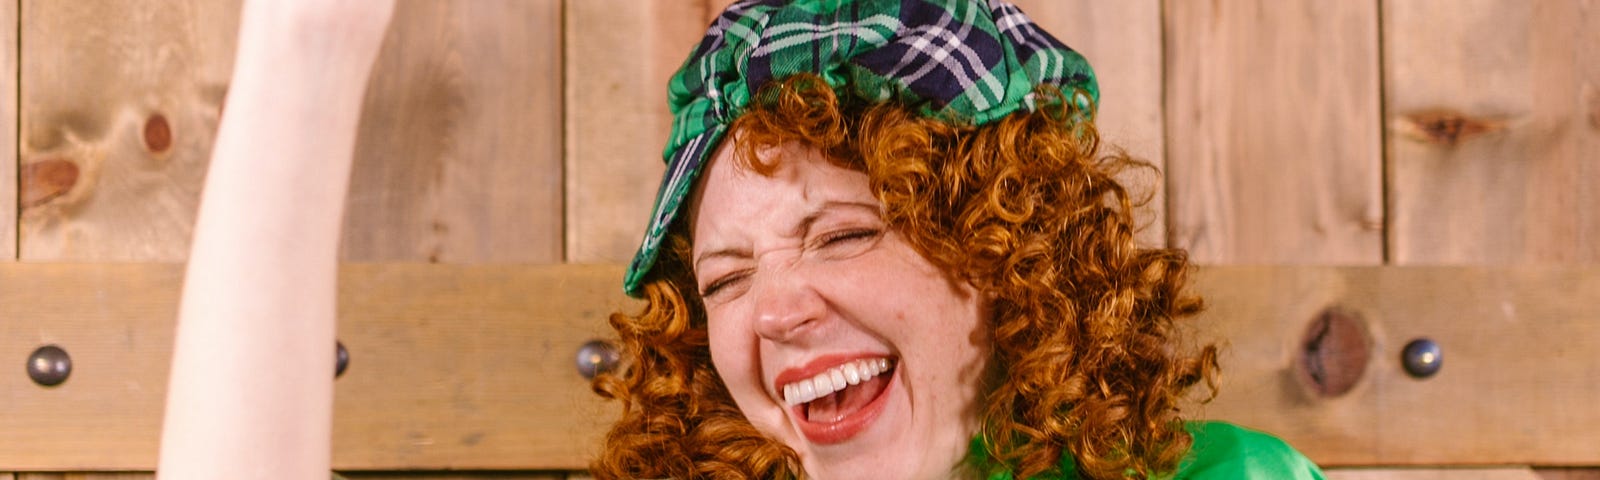 red haired young woman dressed for St. Patrick’s day and carrying a green flagon